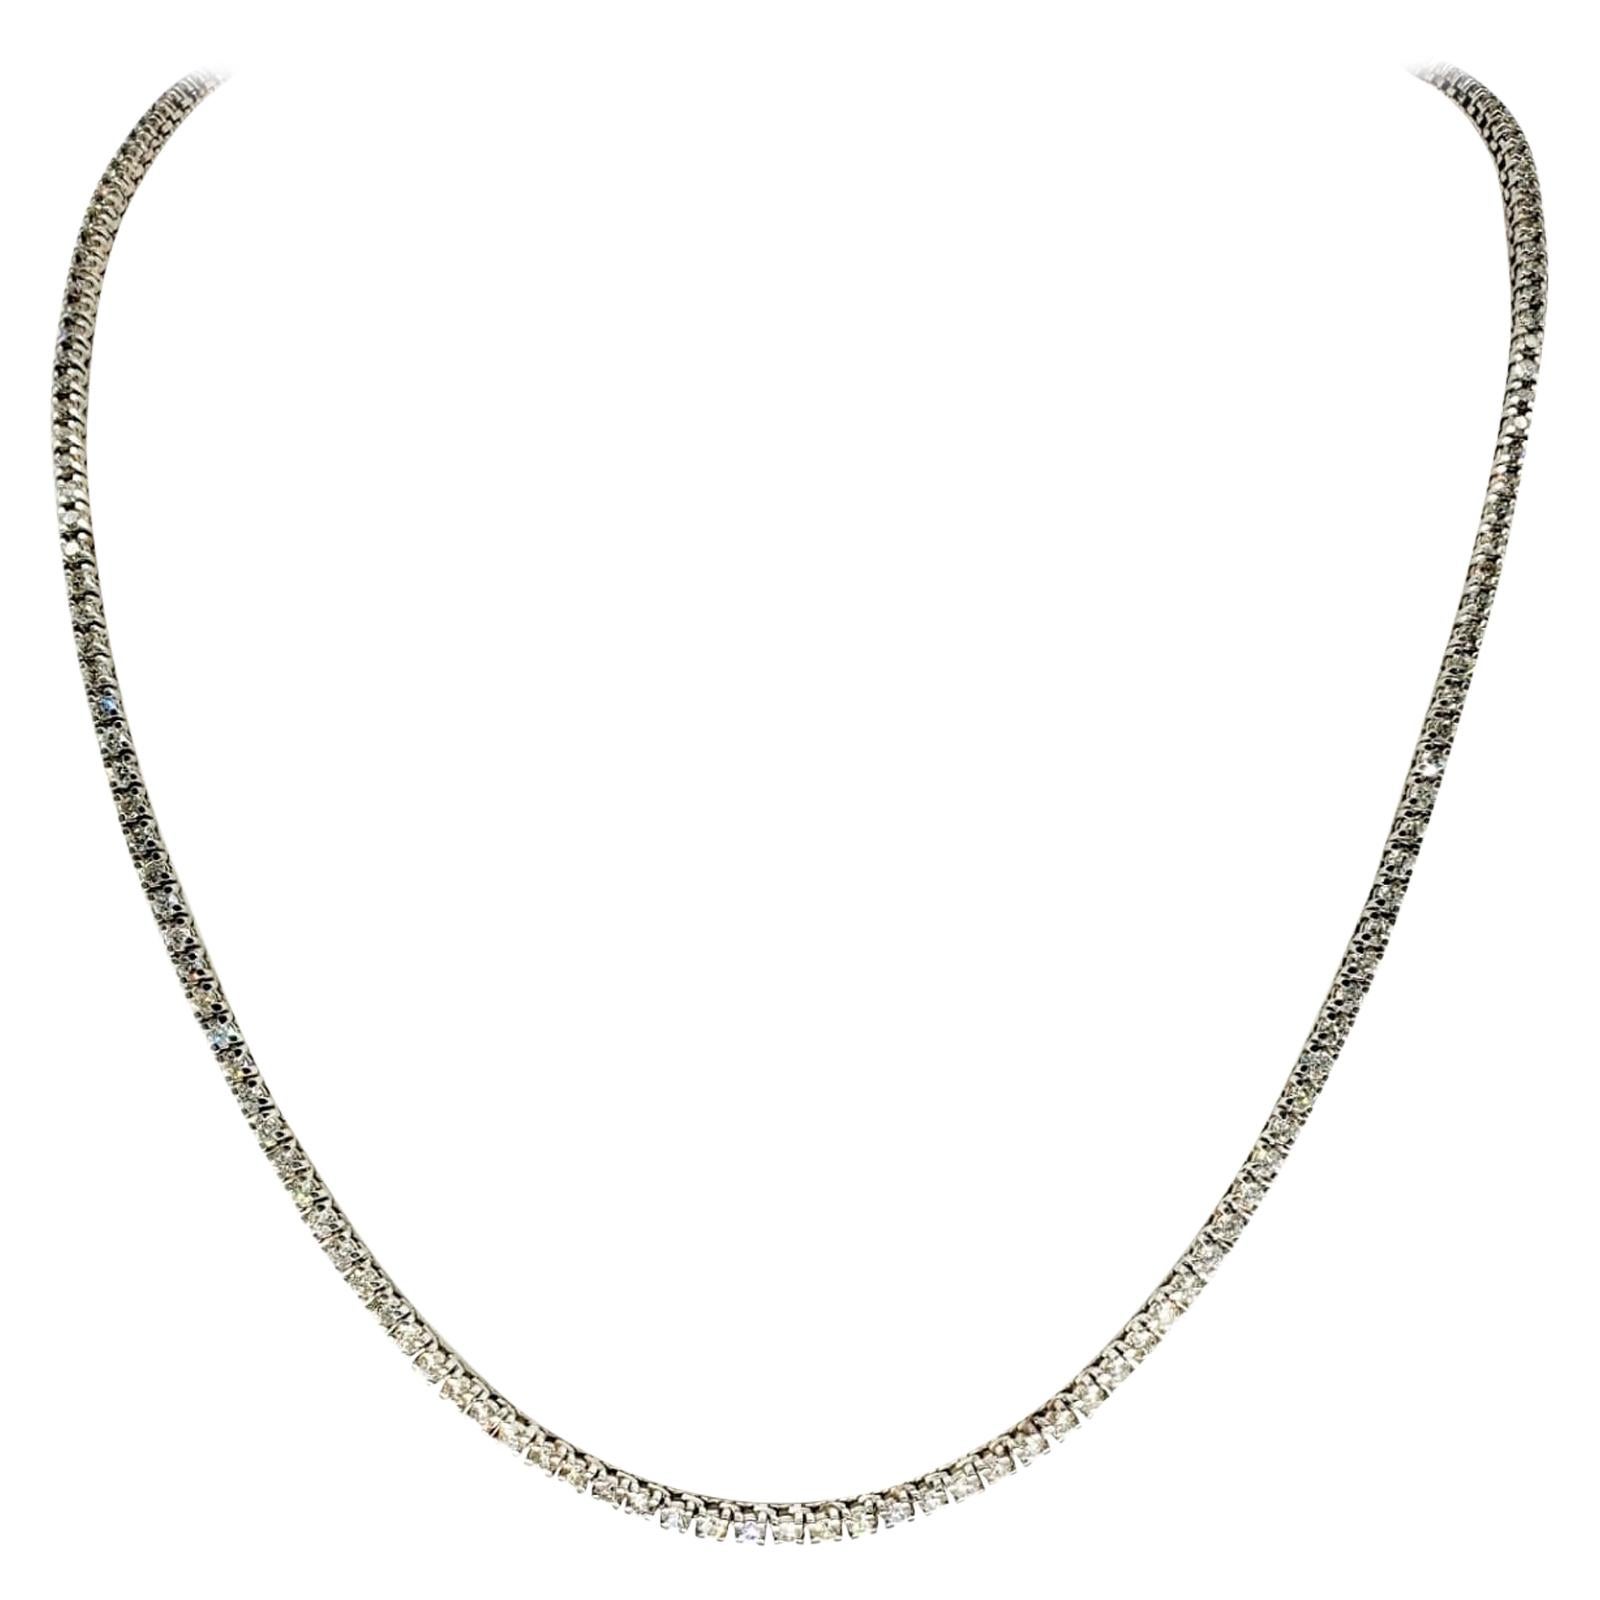 Vintage 14.00 Carat Total Weight Diamond Tennis Chain White Gold For Sale